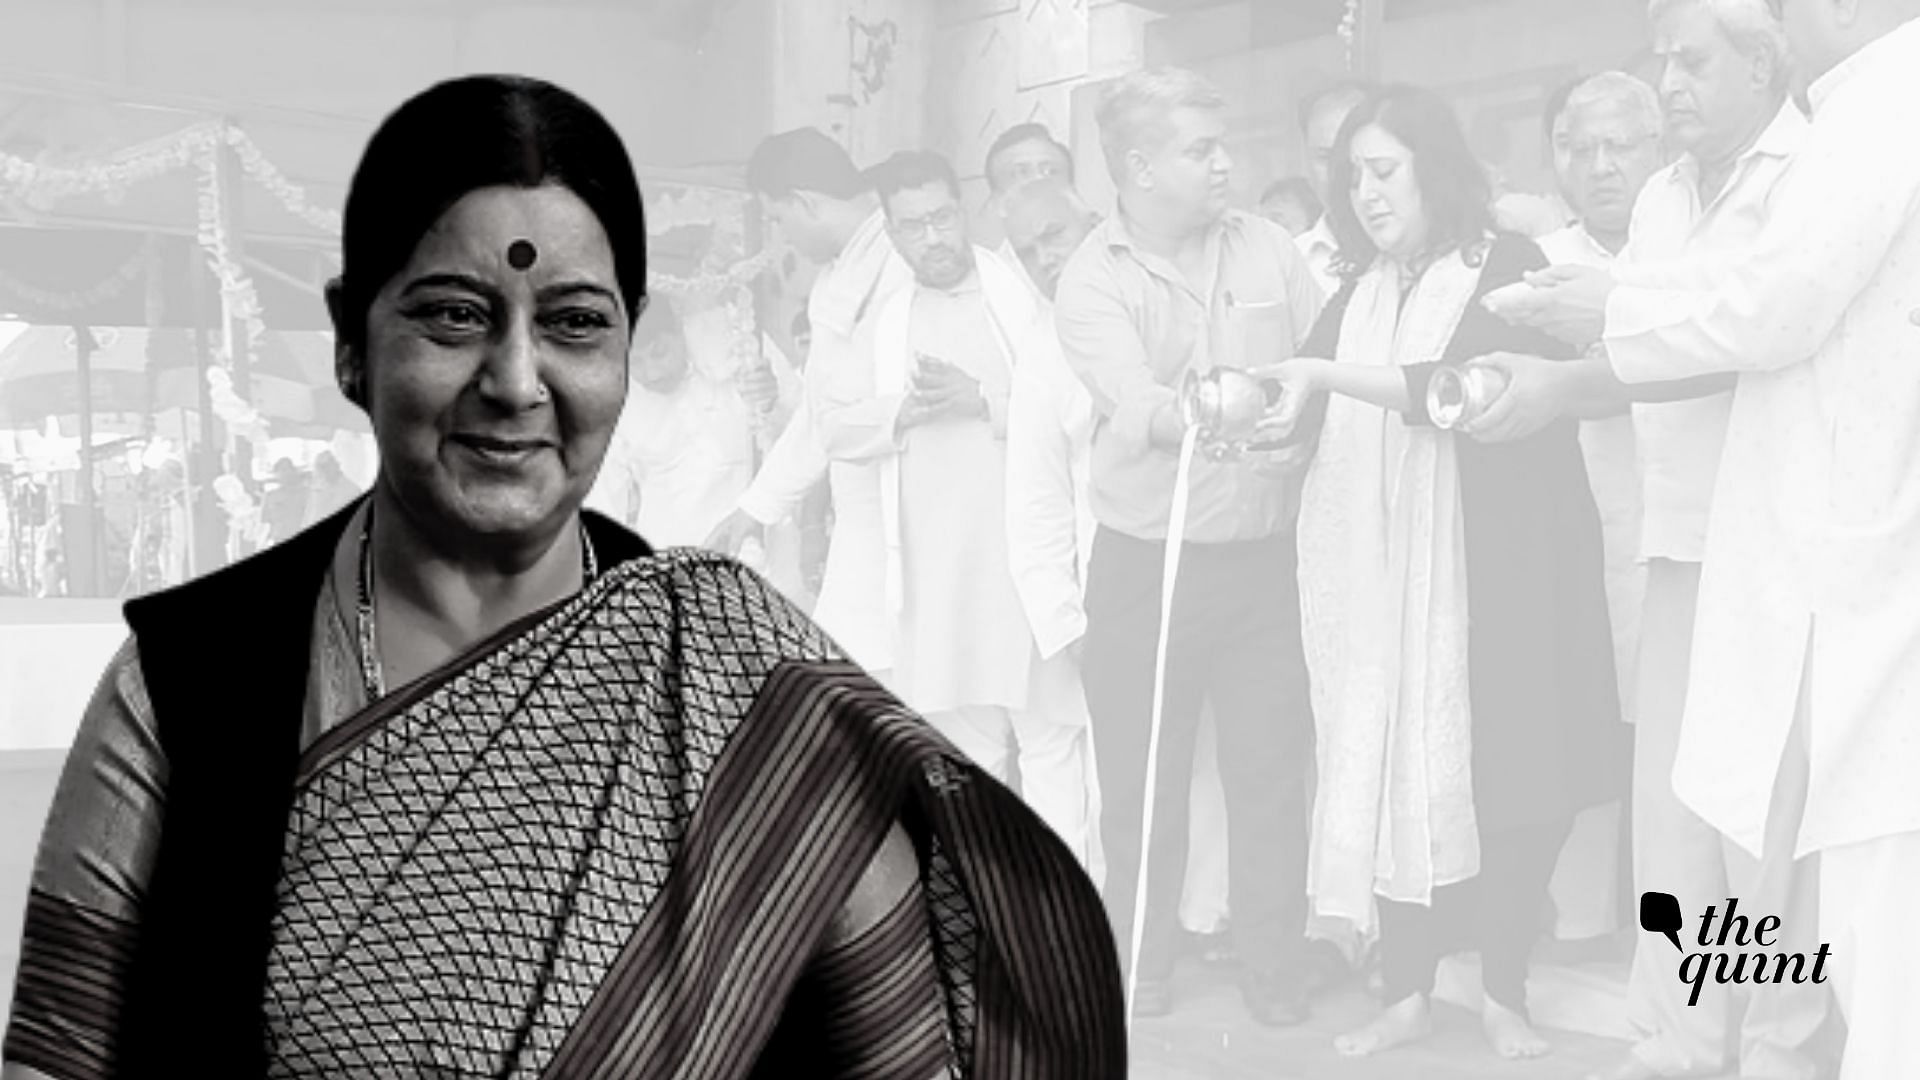 Sushma Swaraj’s ashes were immersed in Ganga by her daughter Bansuri Swaraj in Hapur on Thursday, 8 August.